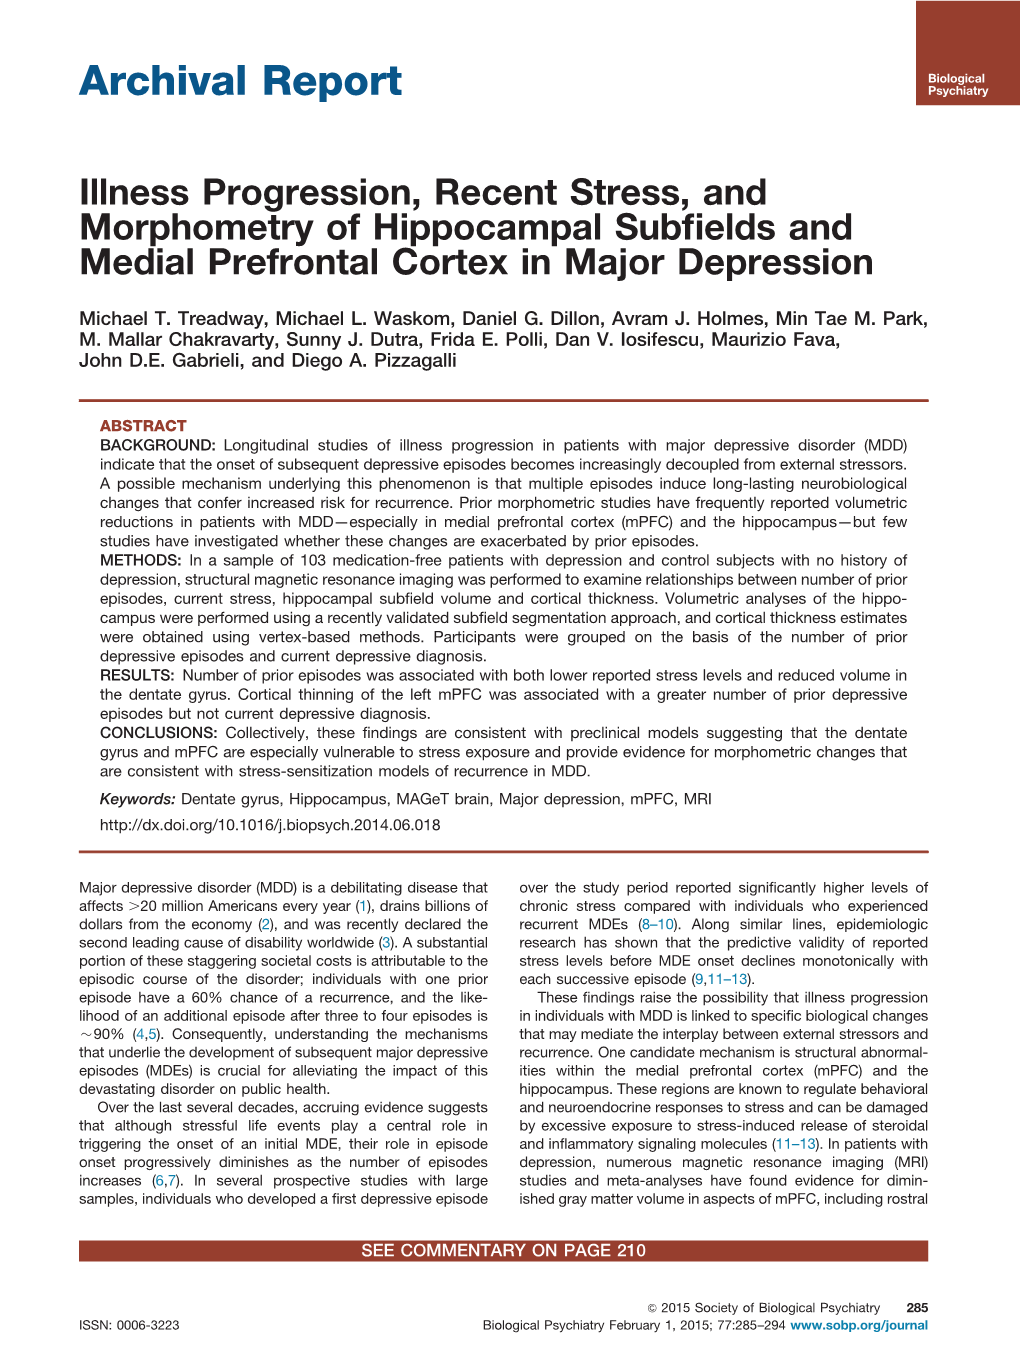 Illness Progression, Recent Stress, and Morphometry of Hippocampal Subfields and Medial Prefrontal Cortex in Major Depression